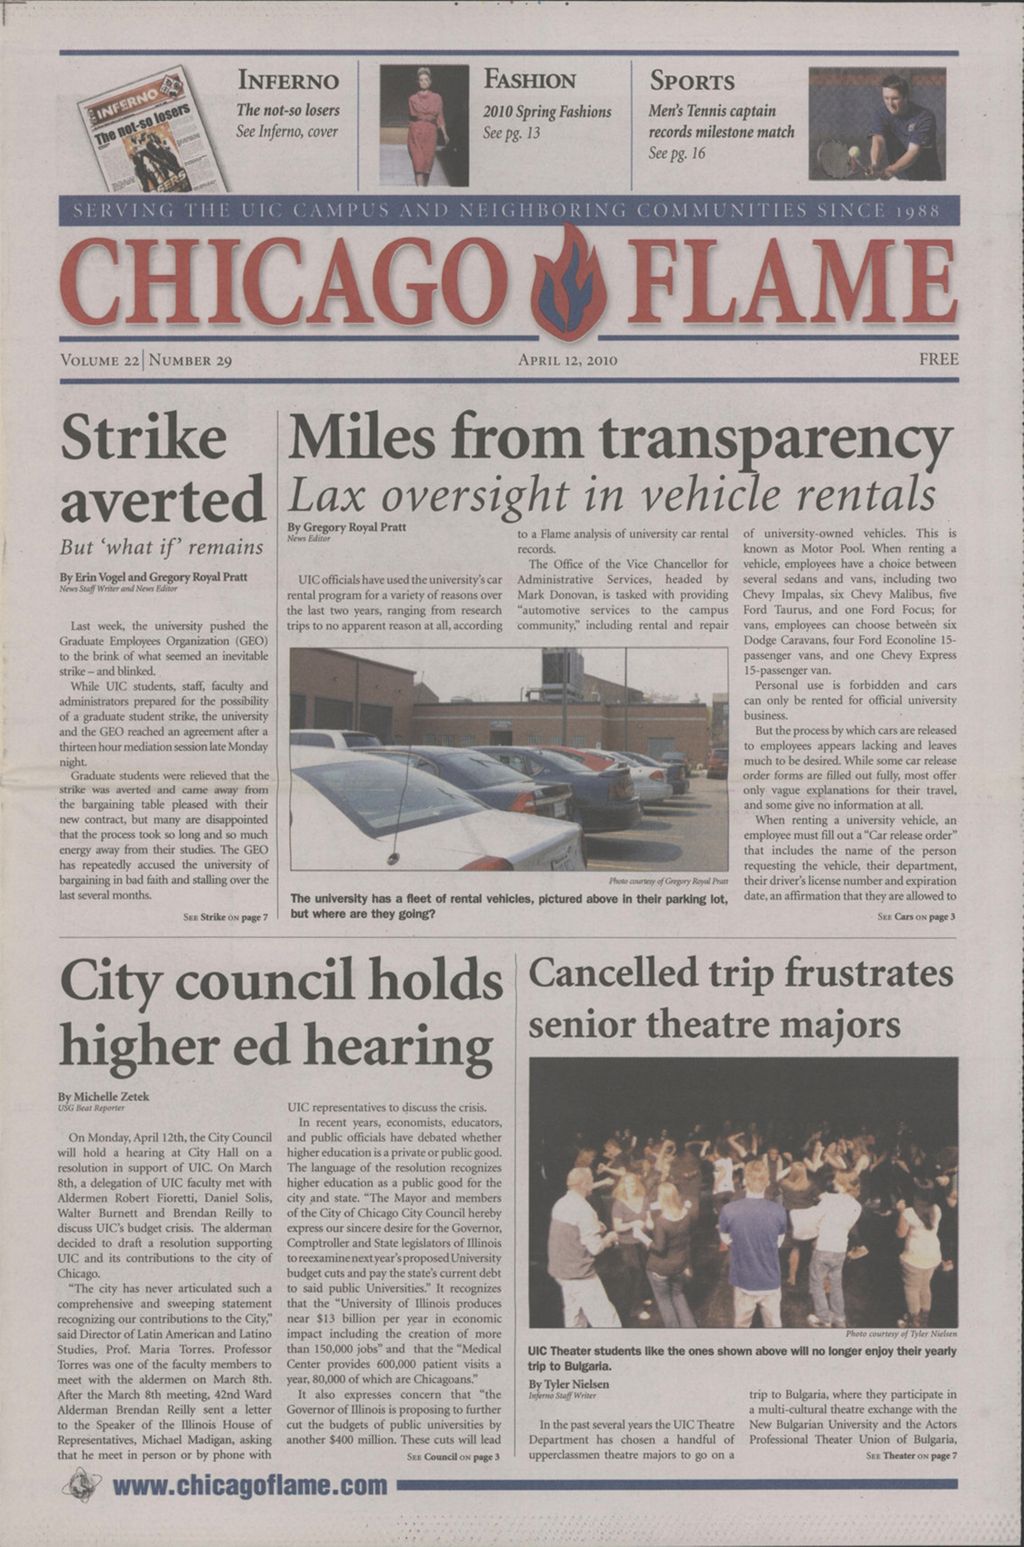 Miniature of Chicago Flame (April 12, 2010)